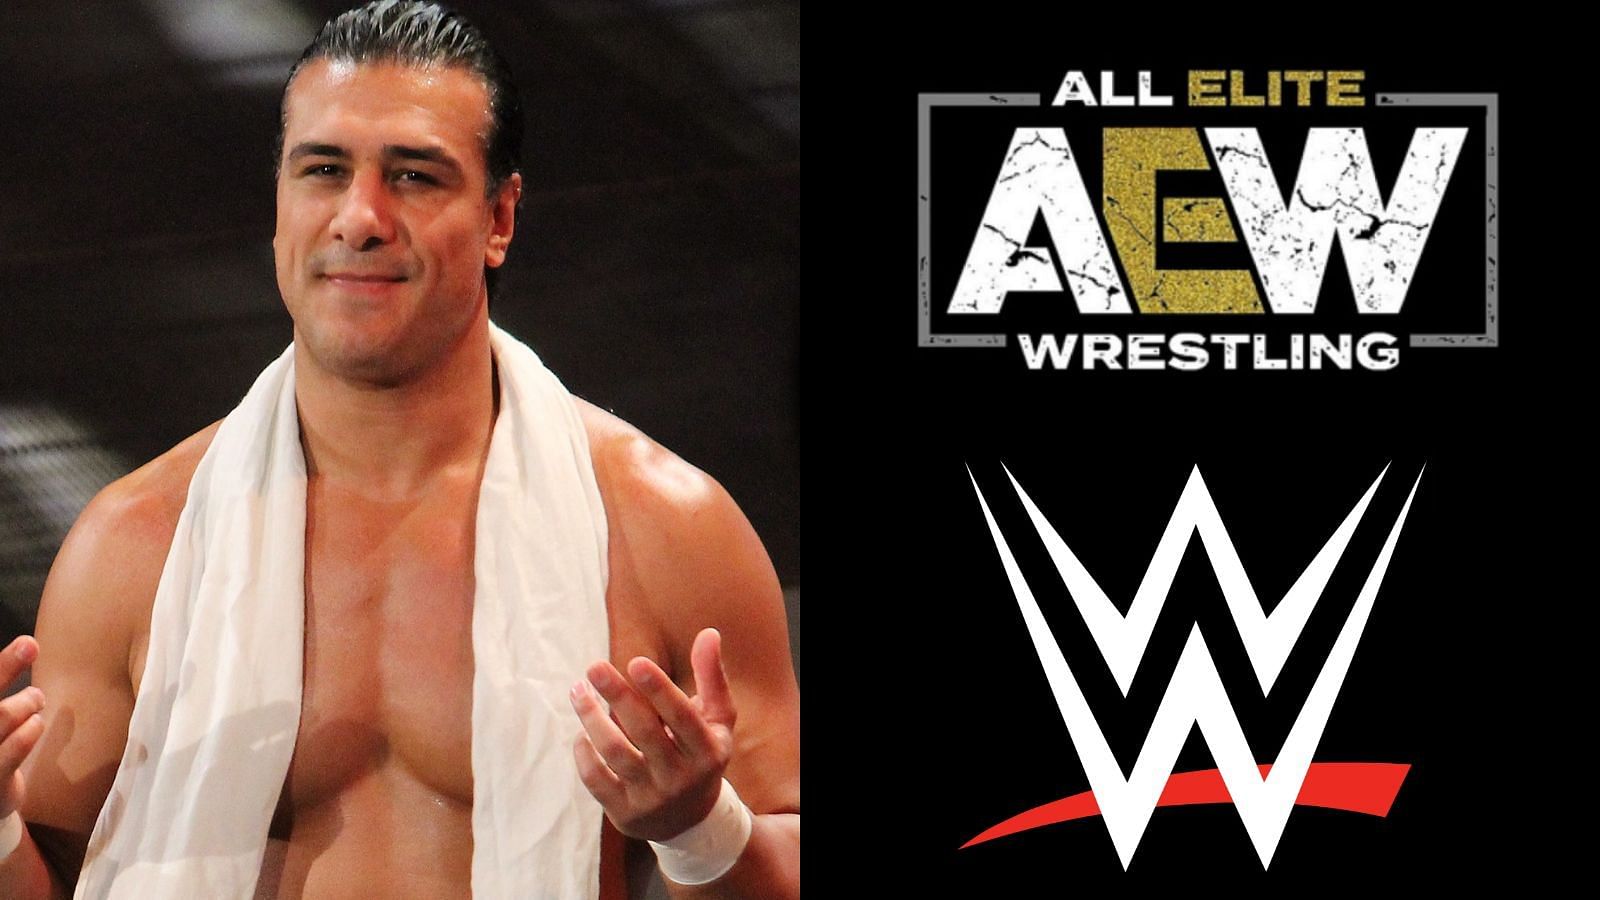 What in AEW could have drawn Alberto&#039;s attention?